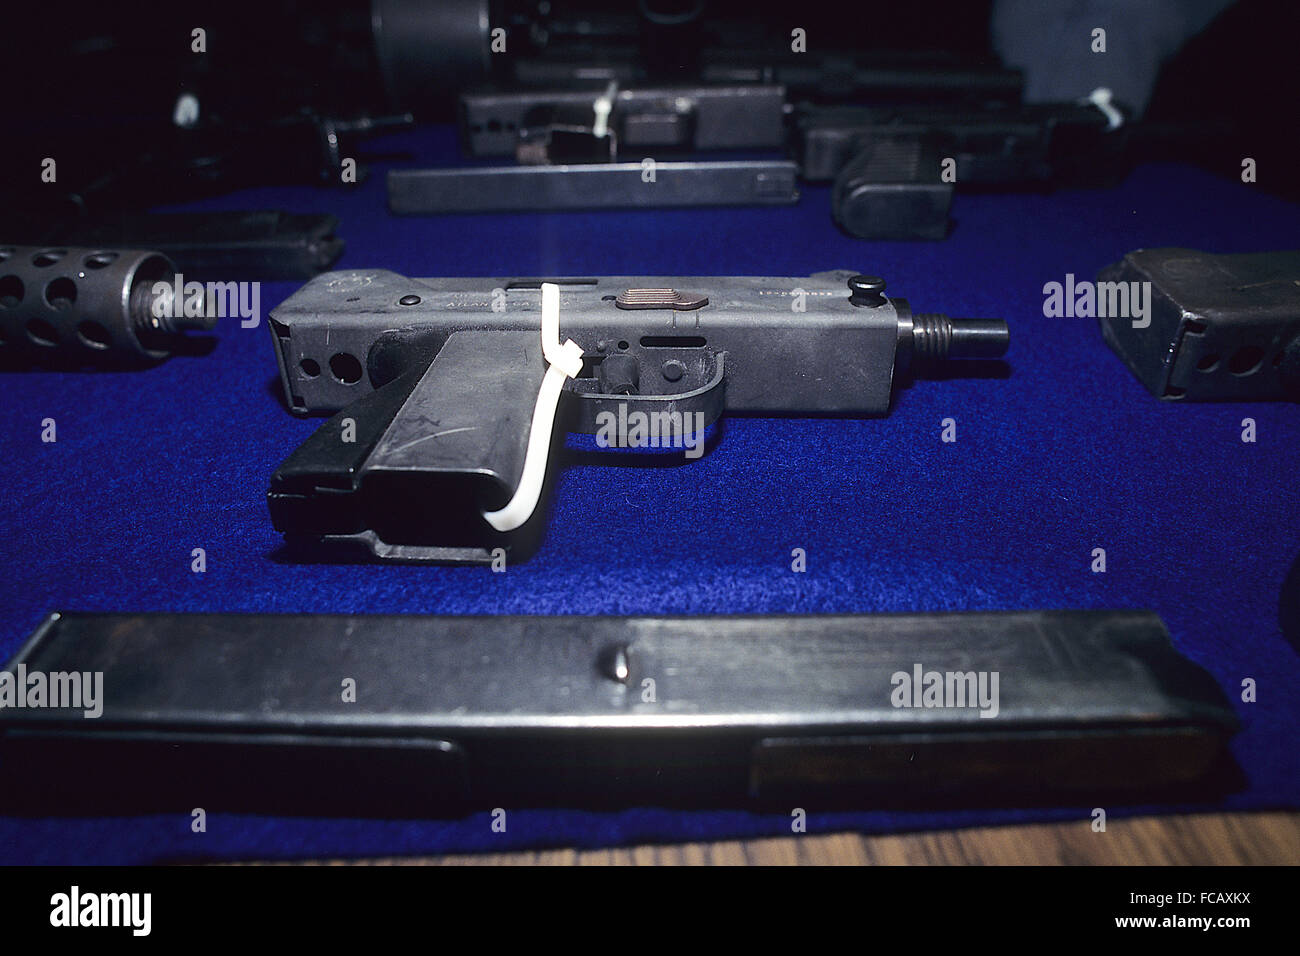 Washington, DC. USA,  1996 Assault weapons on display after being seized off the streets in DC. In the foreground is a 'MAC 10' hand held machine gun that fires a 9mm caliber bullet.  Credit: Mark Reinstein Stock Photo